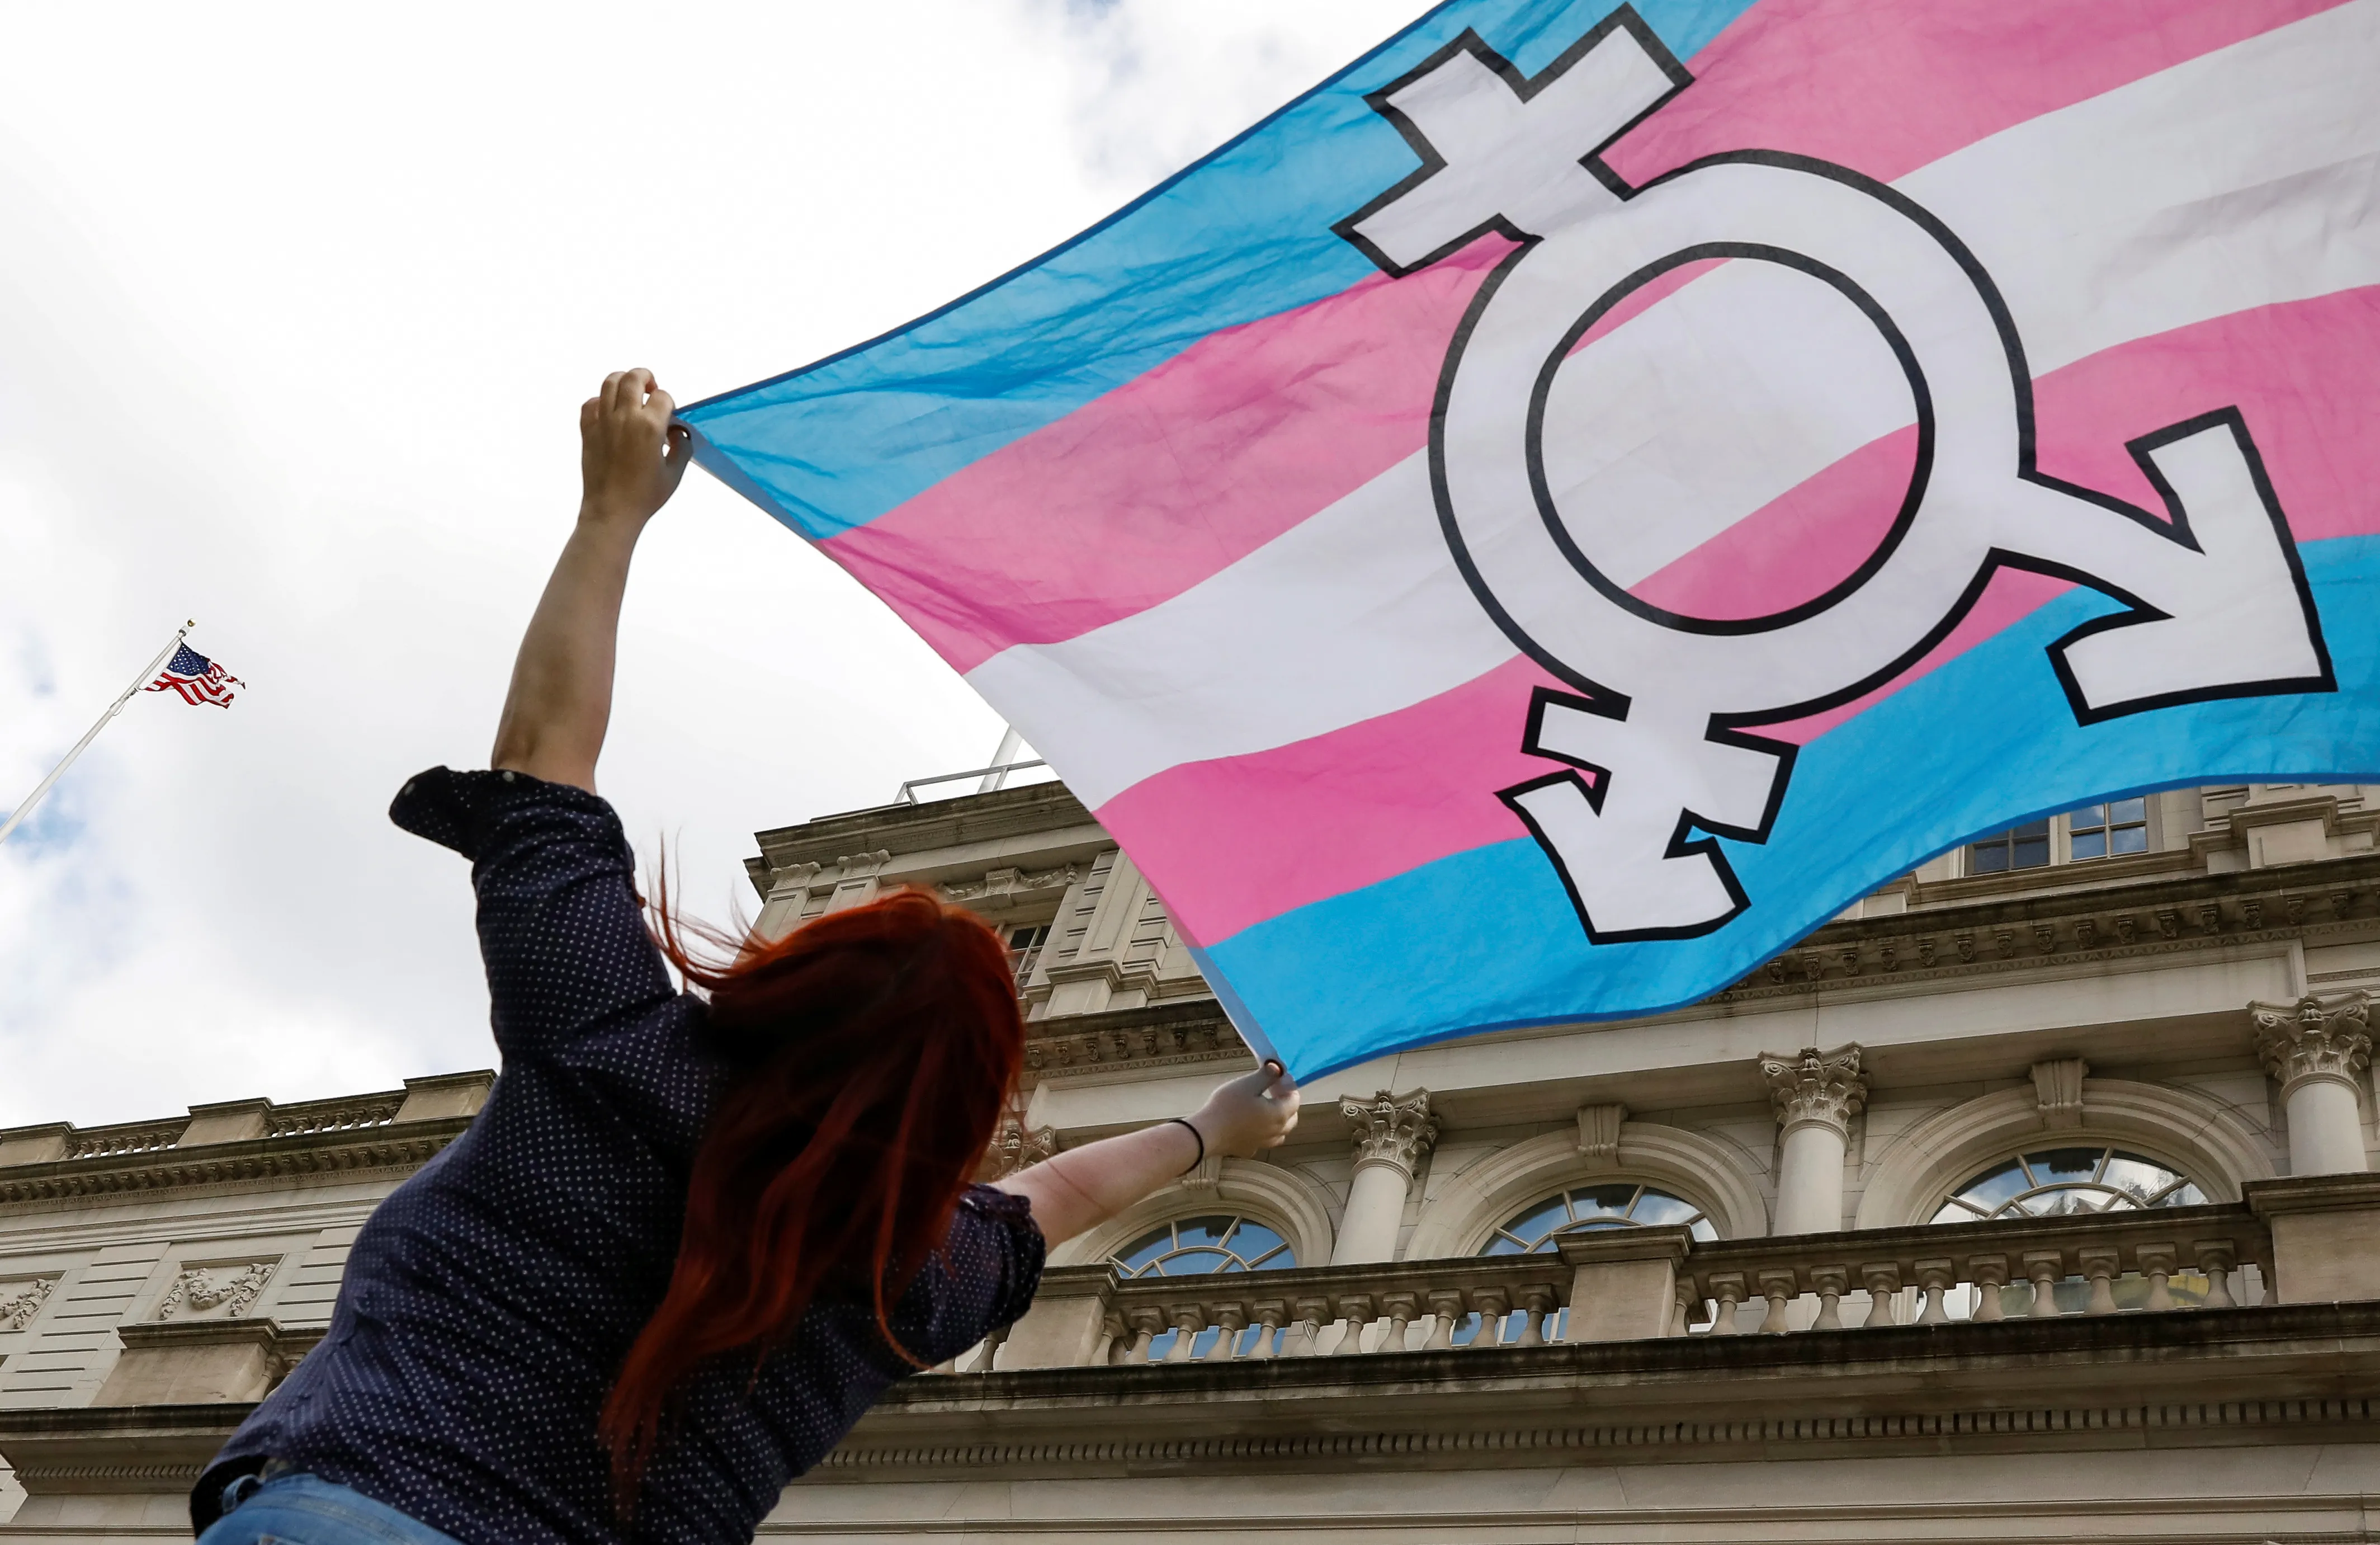 FILE PHOTO: A person holds up a flag during rally to protest the Trump administration's reported transgender proposal to narrow the definition of gender to male or female at birth, at City Hall in New York City, U.S., October 24, 2018. REUTERS/Brendan McDermid